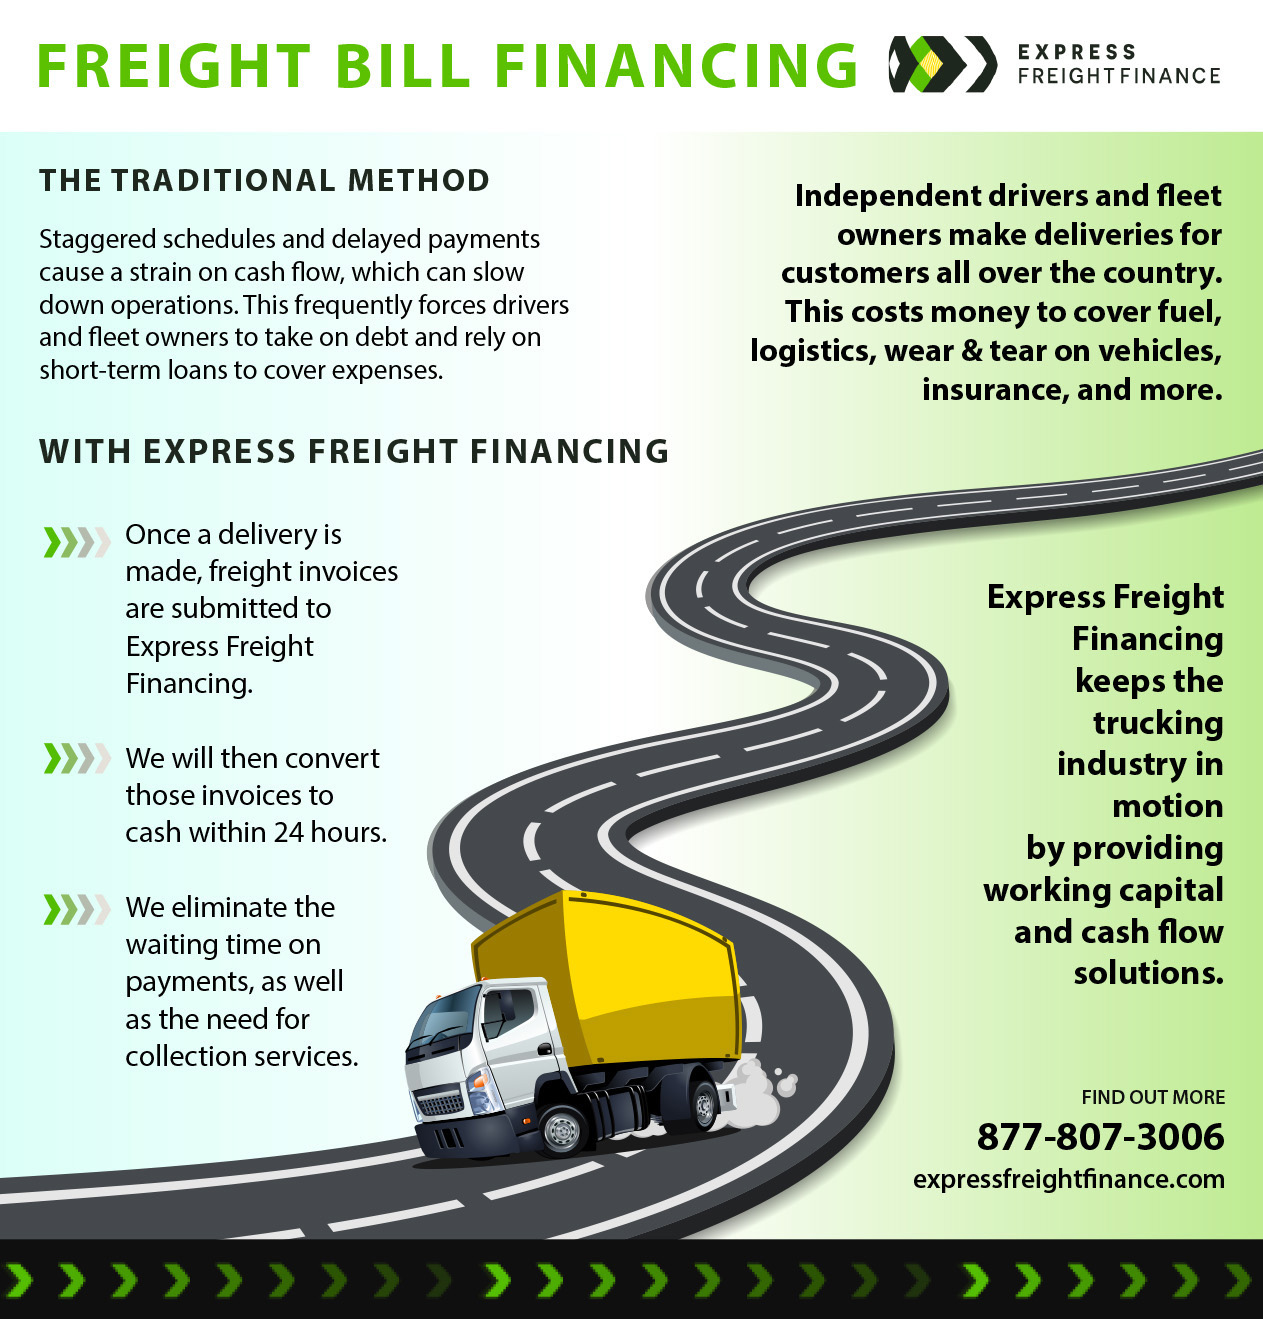 Express-Freight-Finance-Infographic-8-3-17